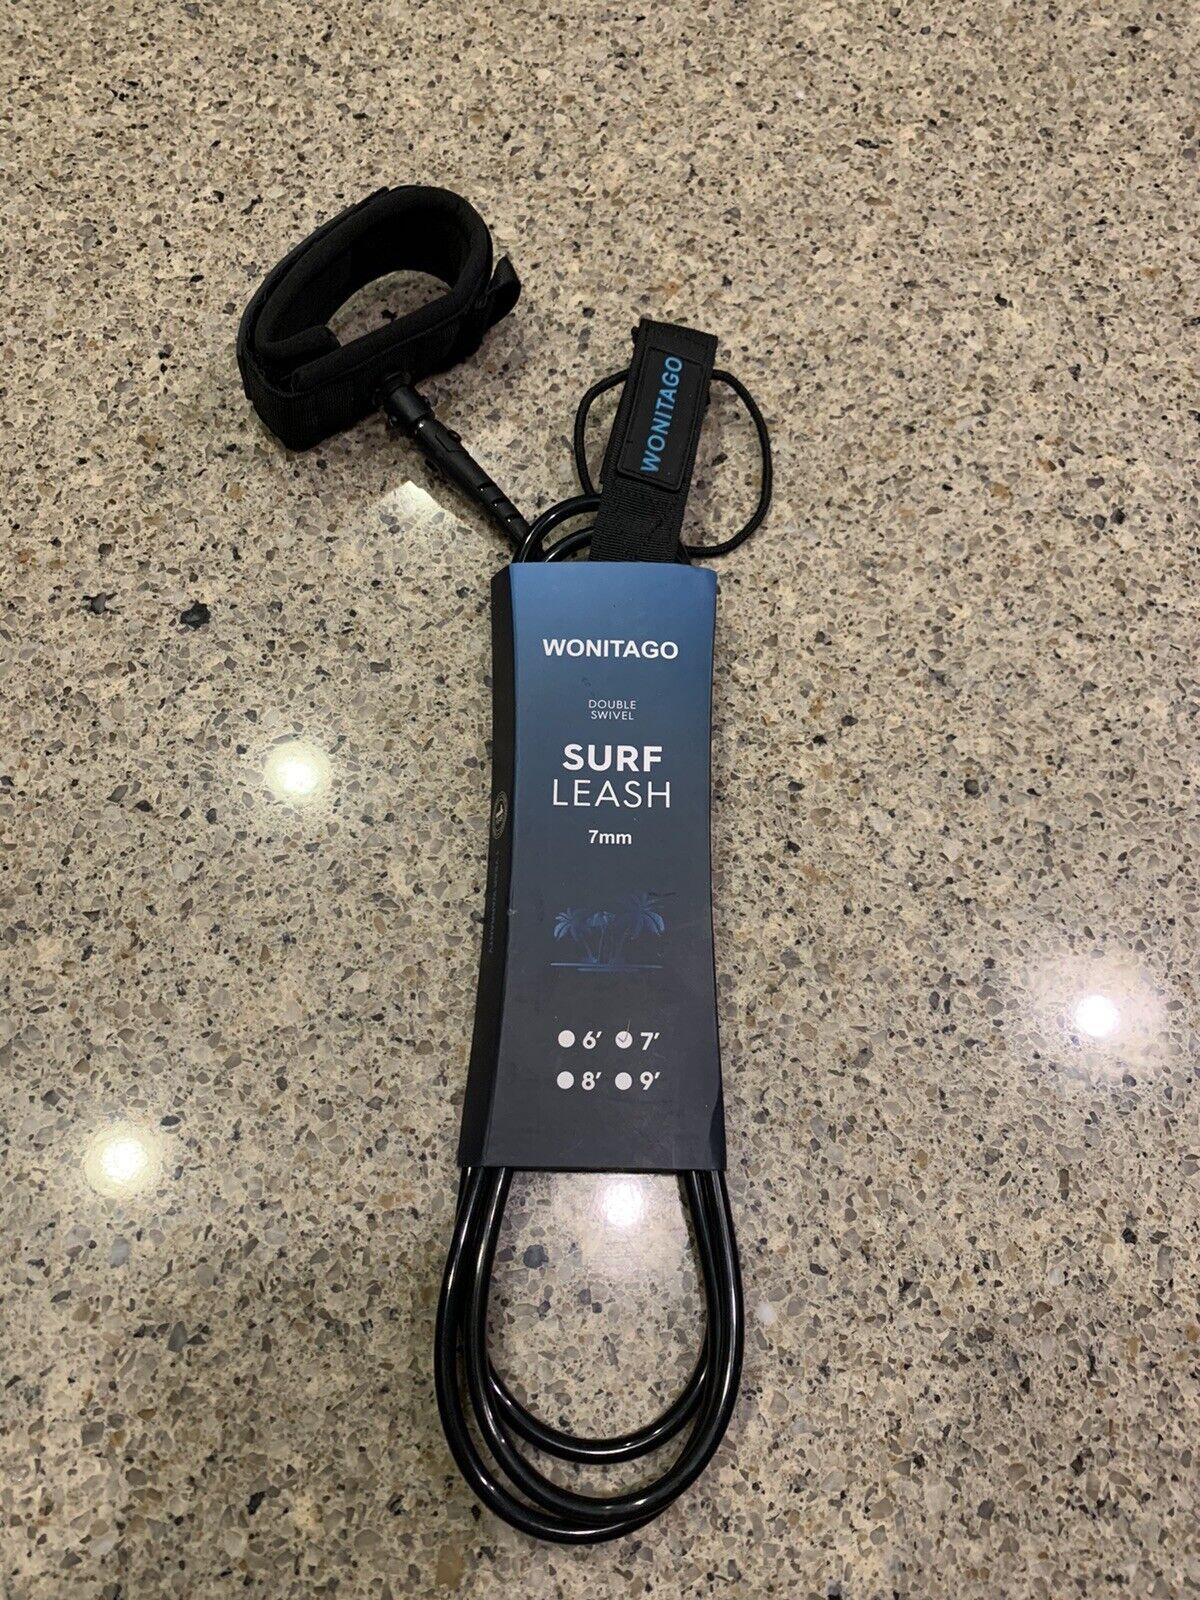 Brand New Surf Leash Wonitago 7' 7mm Double Swivel With Key Pocket Quick Release